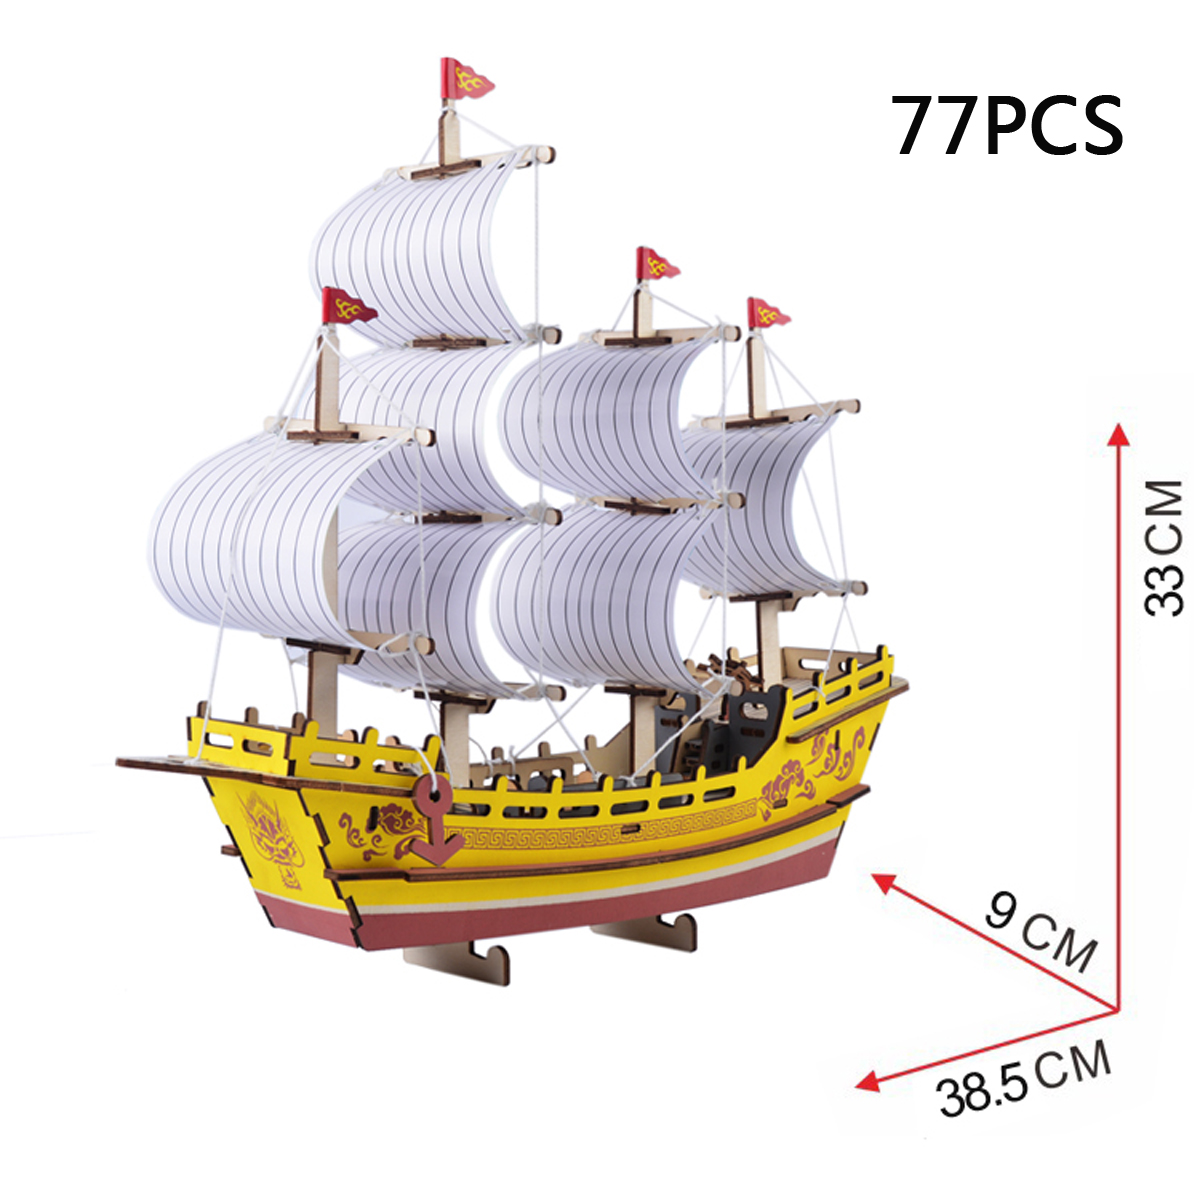 3D-Woodcraft-Assembly-Sailing-Series-Kit-Jigsaw-Puzzle-Decoration-Toy-Model-for-Kids-Gift-1635638-5